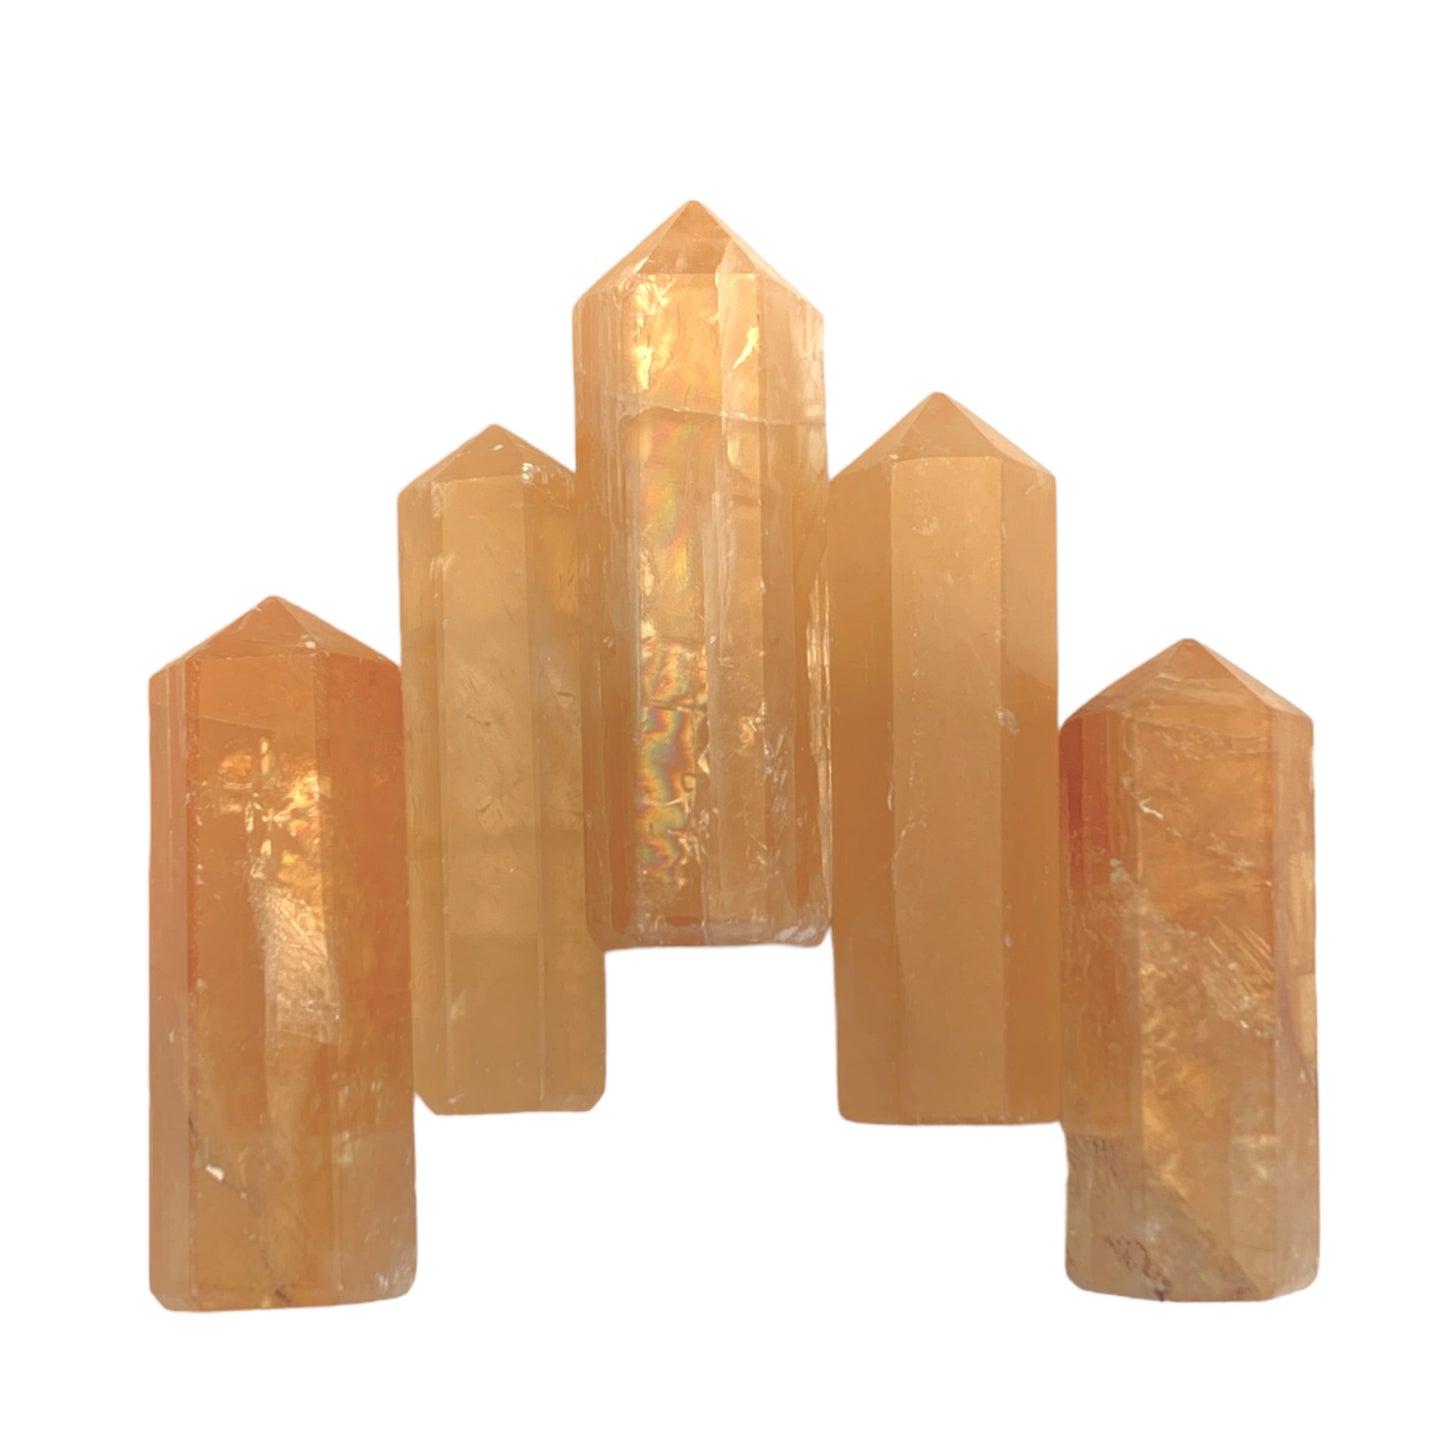 Citrine - 33-40mm - Single Terminated Pencil Points - (retail purchase as singles, wholesale min order 5) NEW1020 - India